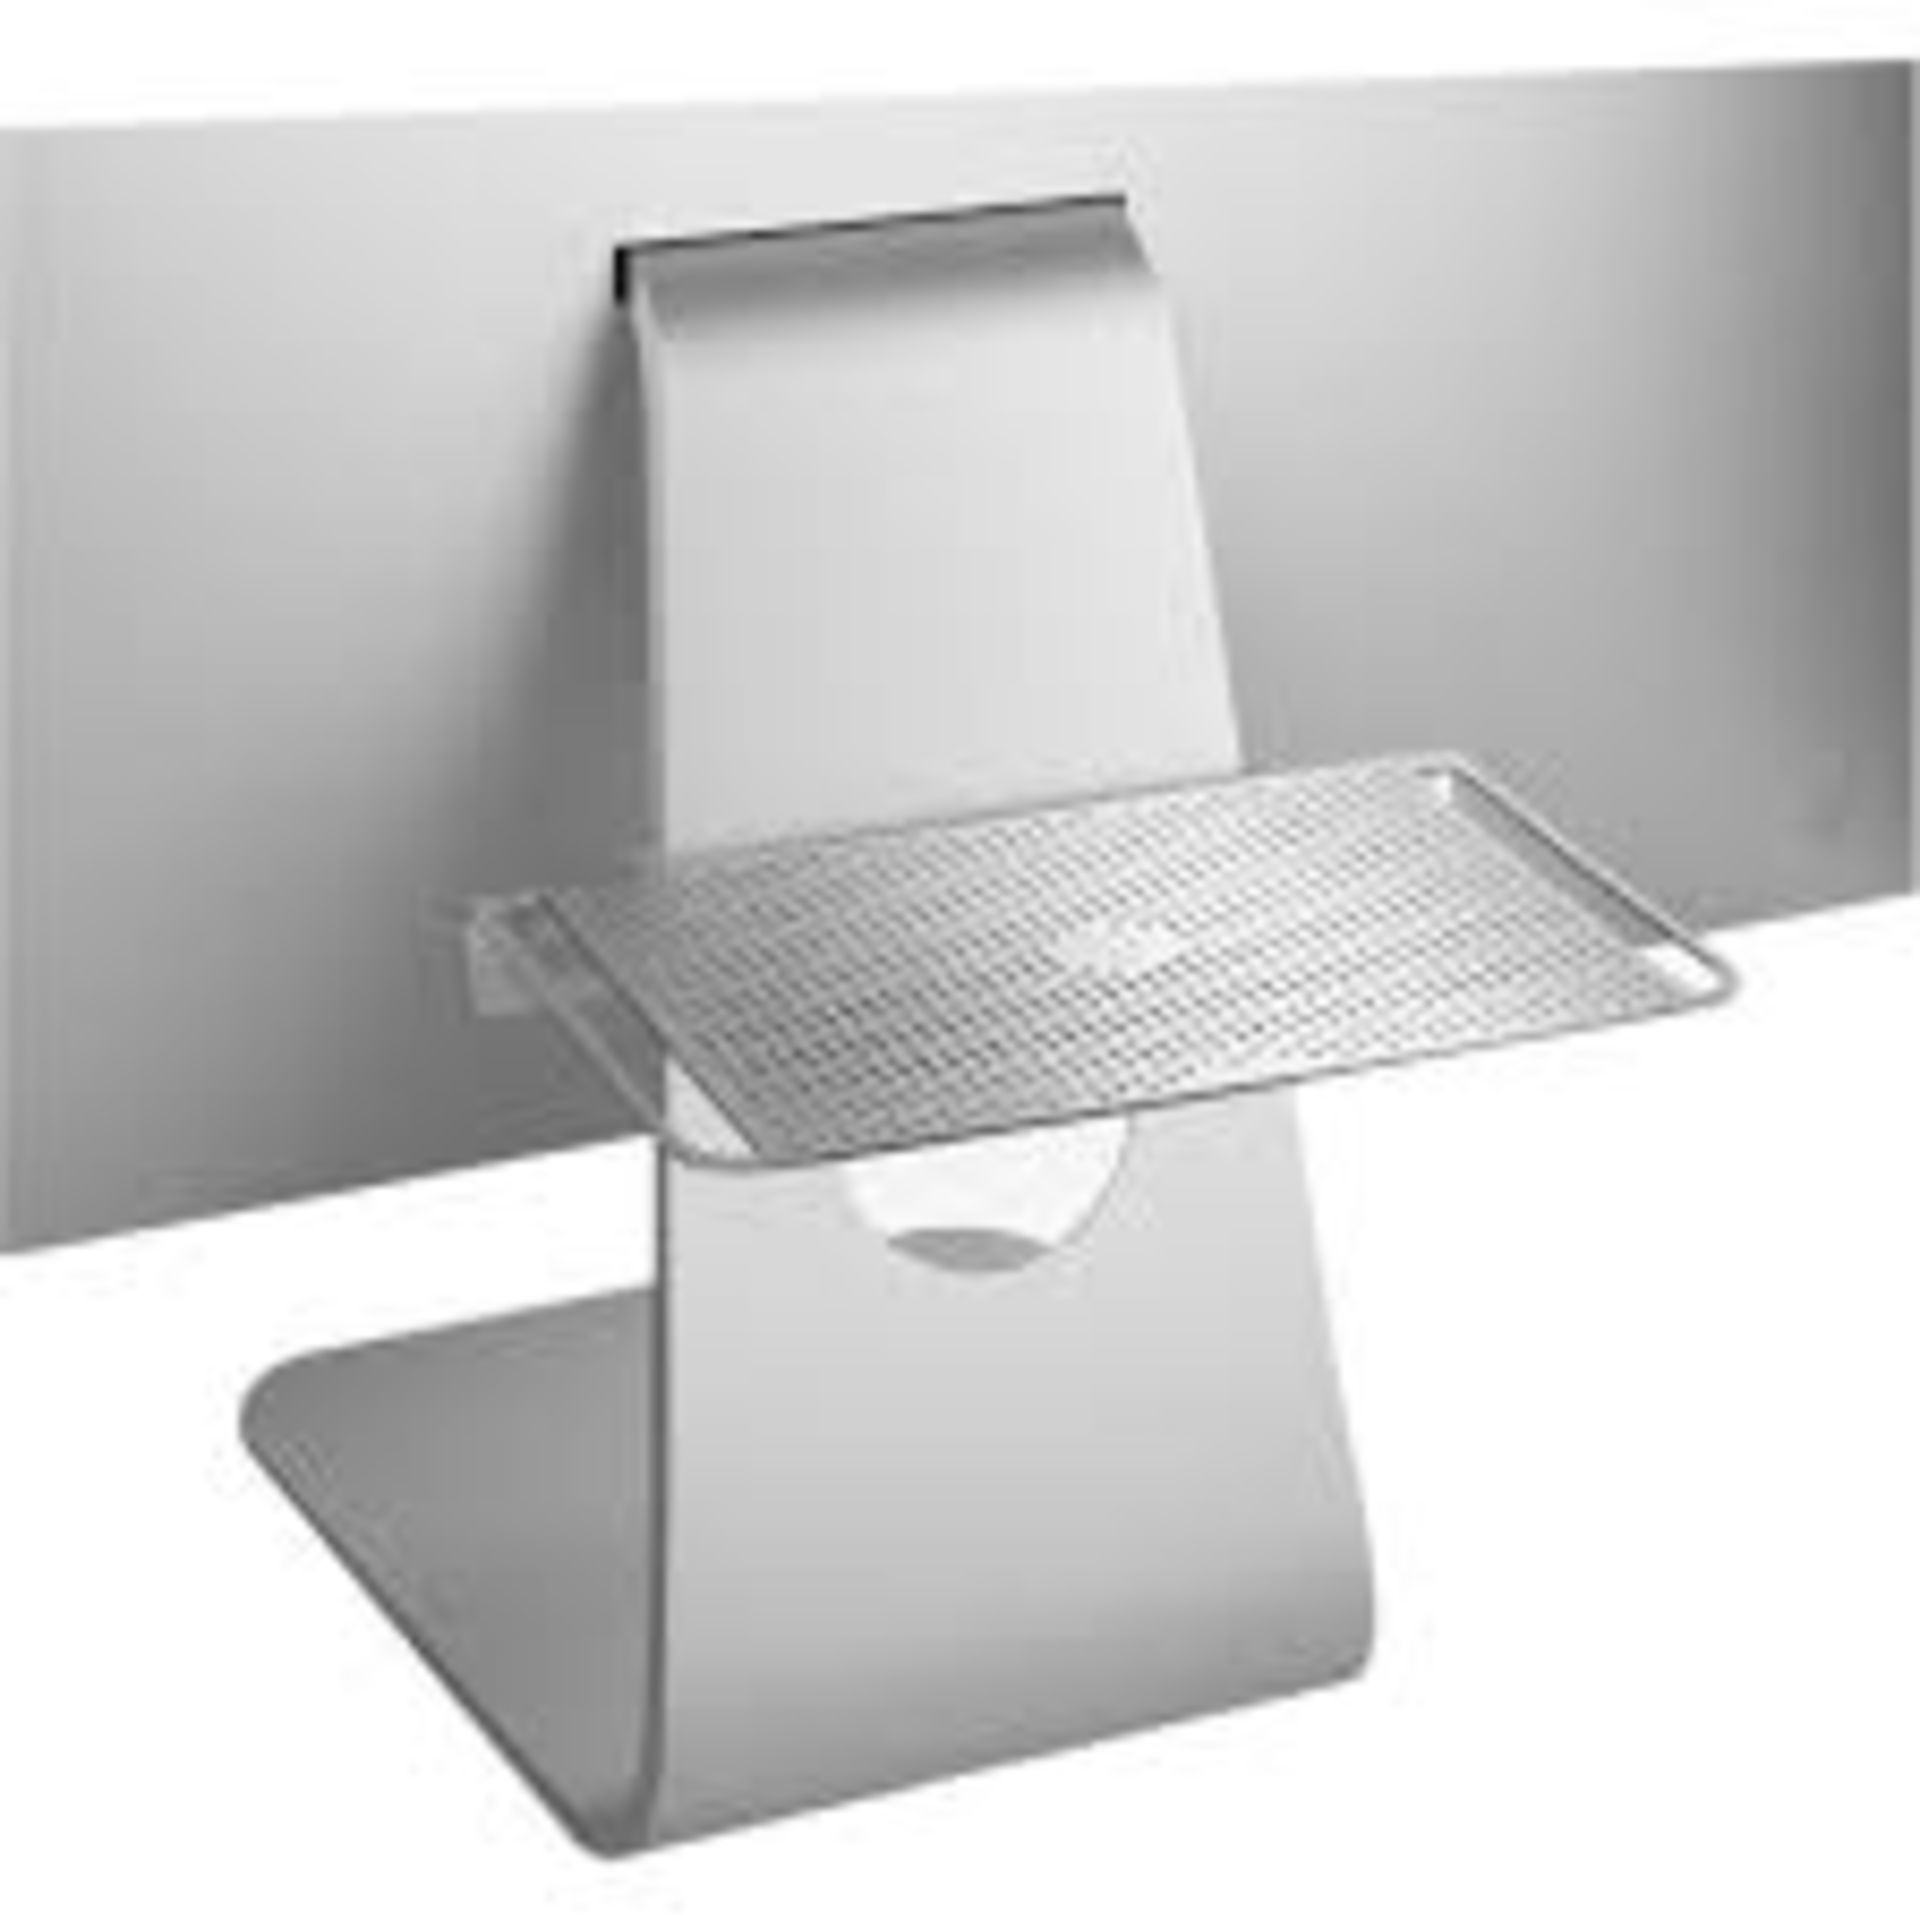 Boxed 12 South Adjustable Shelf for iMac RRP £34.99